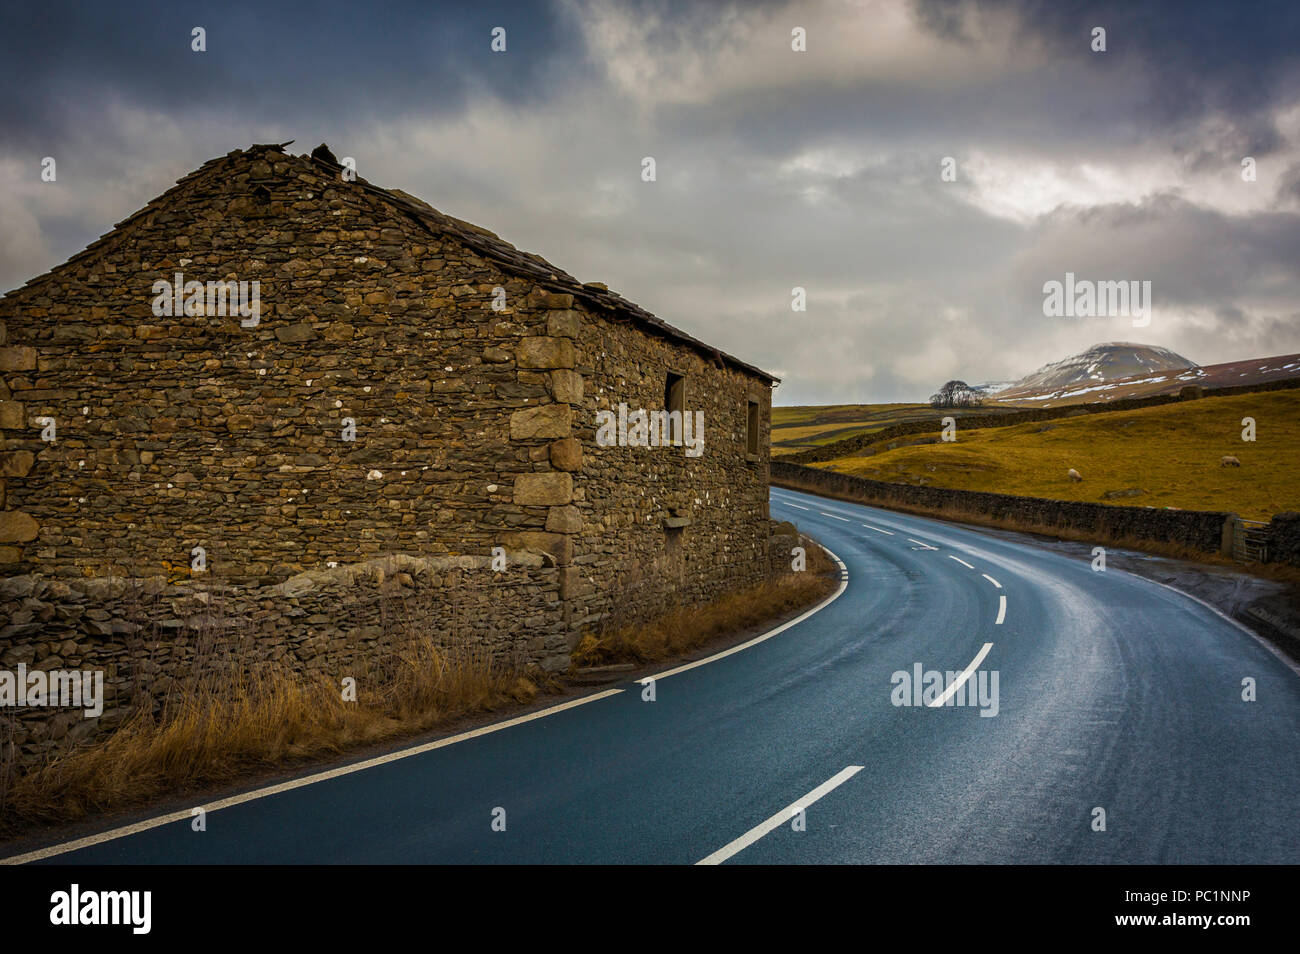 A barn on a blind bend on a winding road leading towards Pen-Y-Ghent seen in the distance. Stock Photo